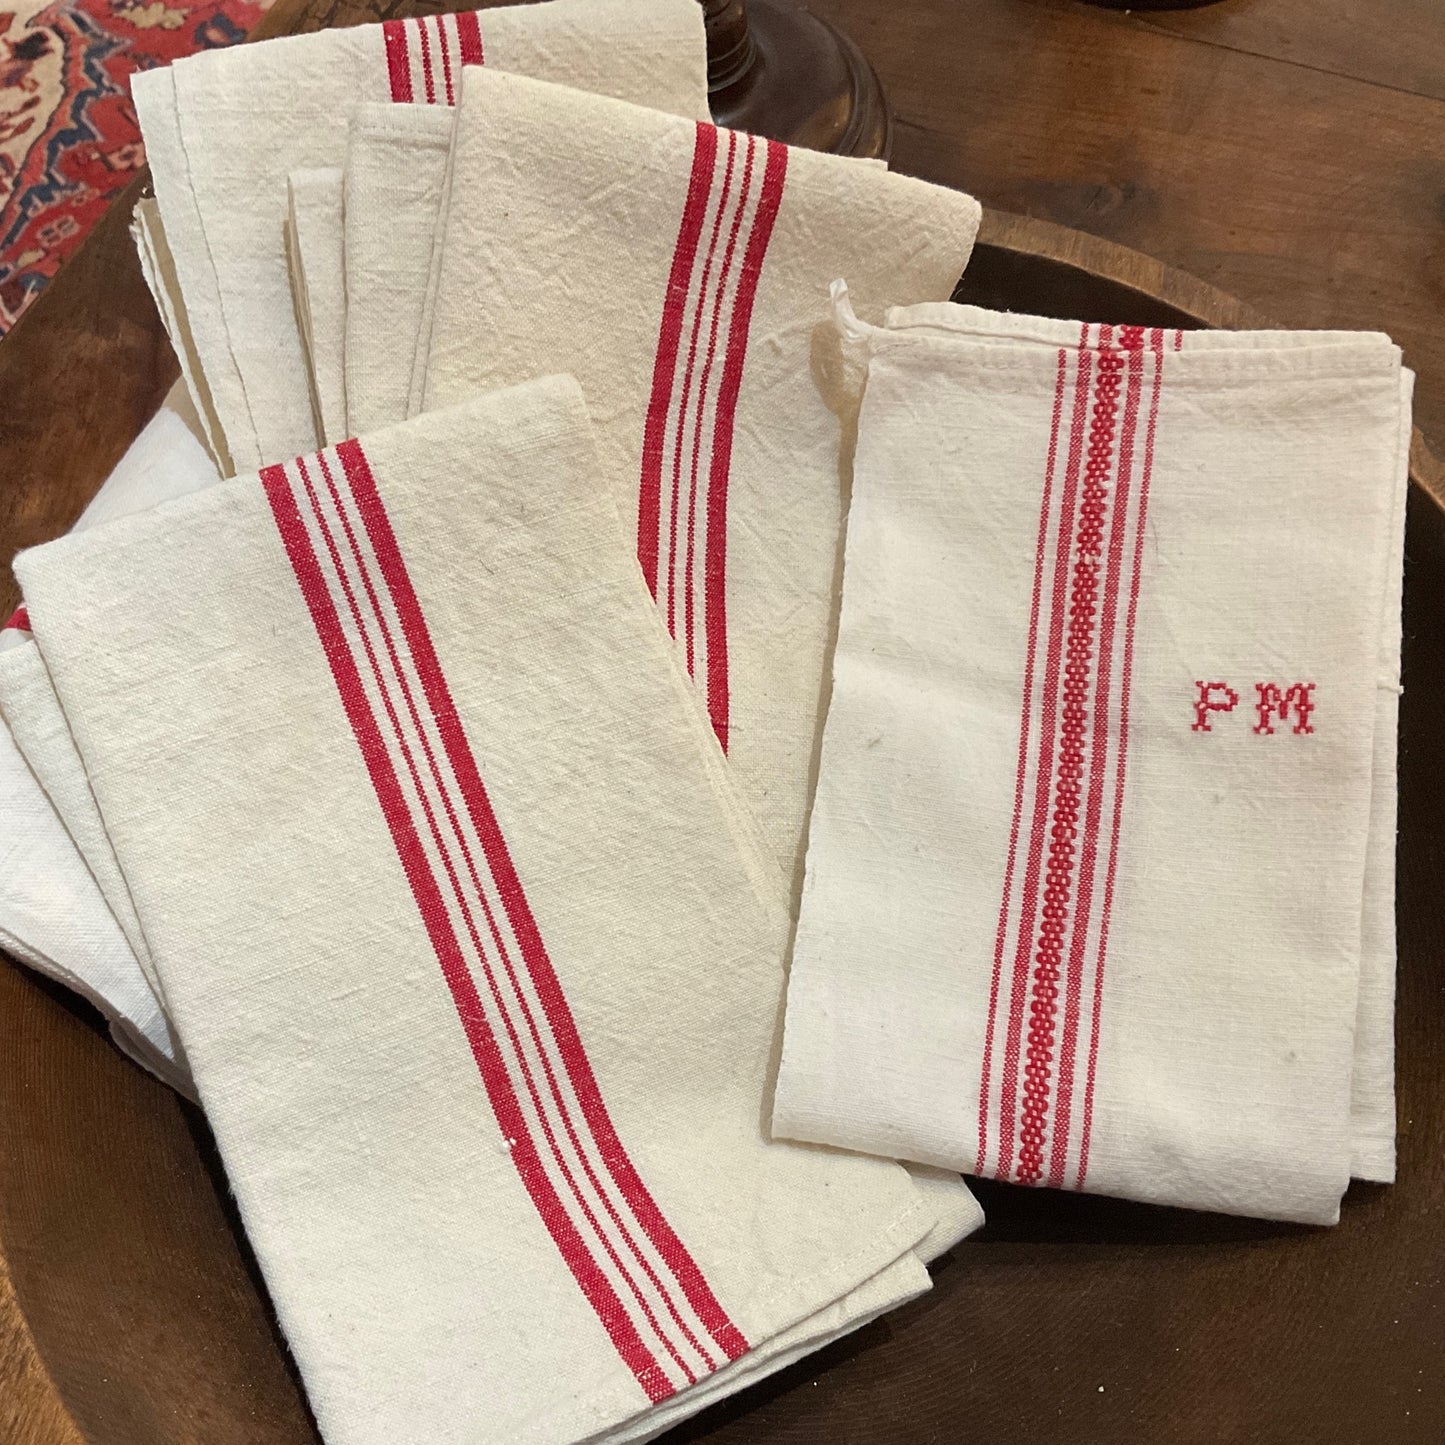 French Torchons (towels)